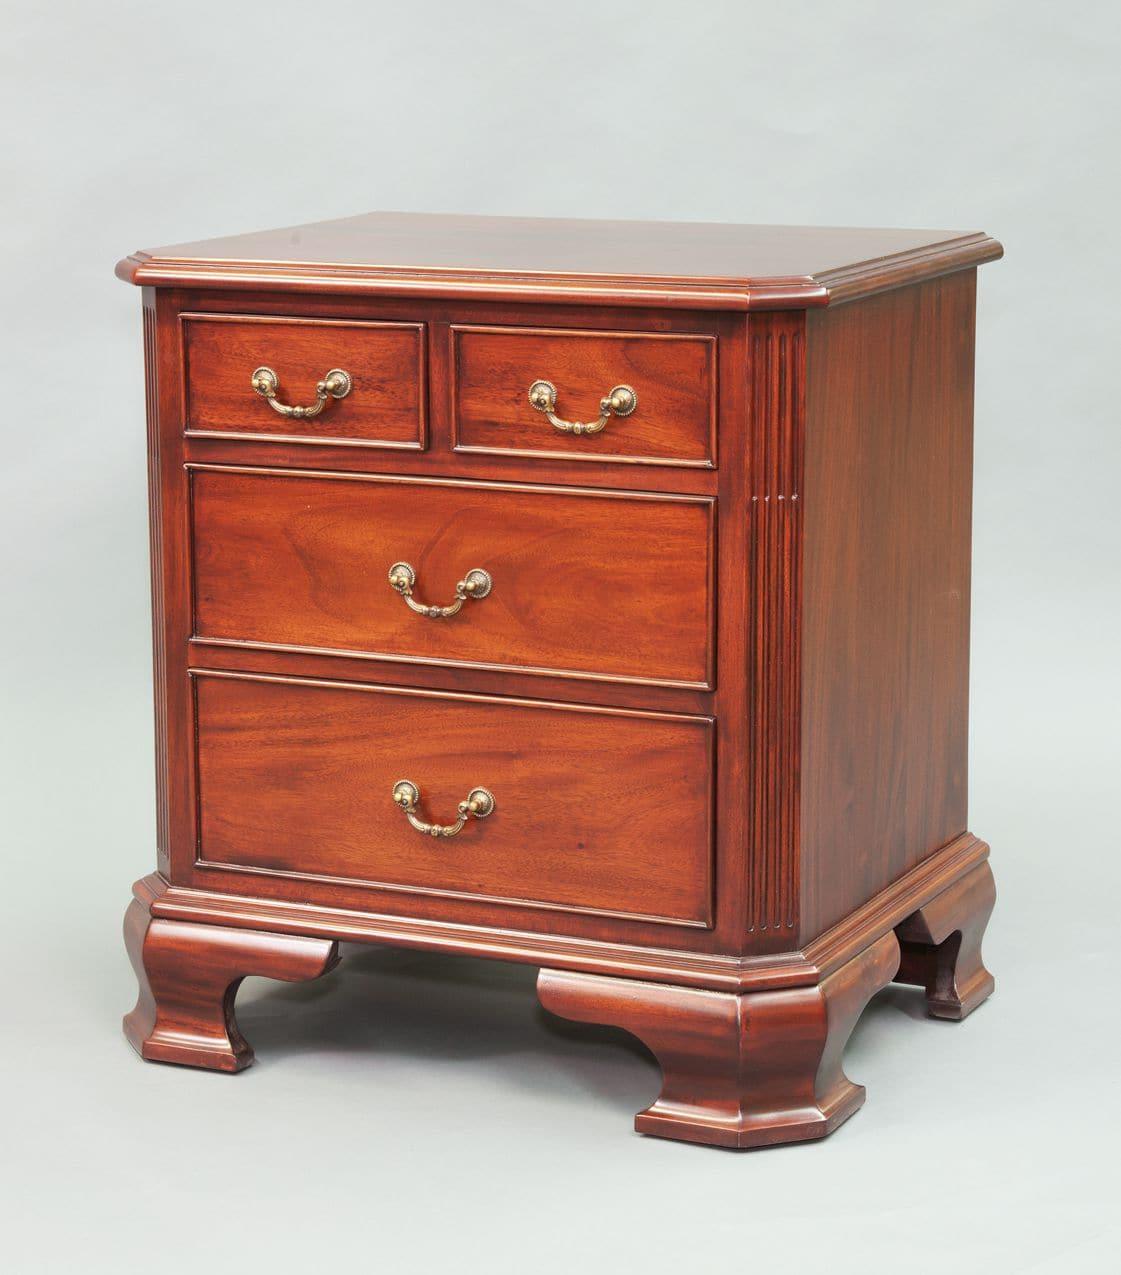 GEORGIAN STYLE NIGHTSTAND - House of Chippendale